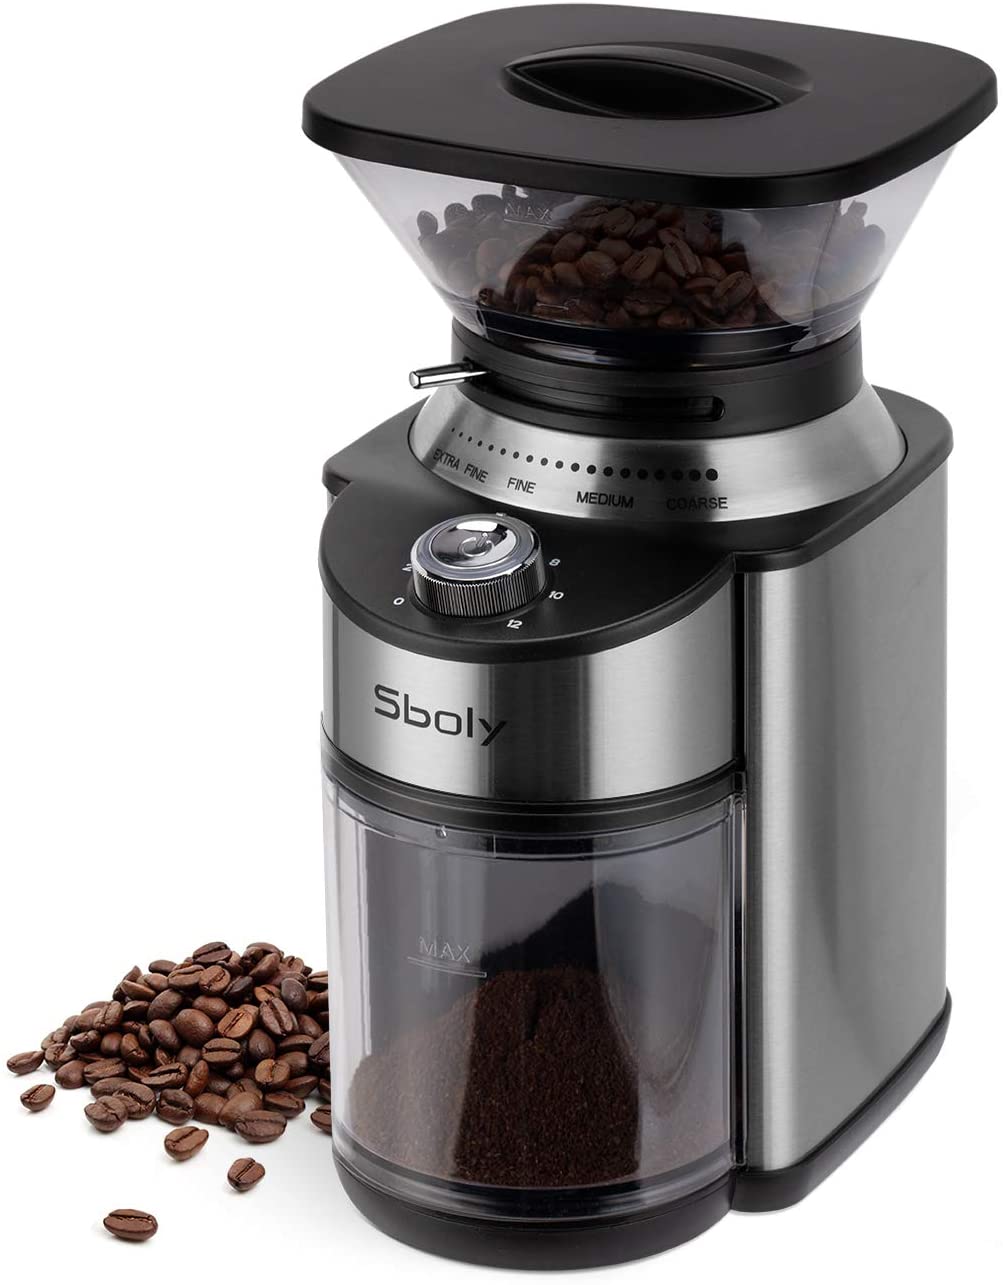 https://demibang.com/wp-content/uploads/2020/10/Sboly-Conical-Burr-Coffee-Grinder-Stainless-Steel-Adjustable-Burr-Mill-with-19-Precise-Grind-Settings-Electric-Coffee-Grinder-for-Drip-Percolator-French-Press-American-and-Turkish-Coffee-Makers-84.25.jpg